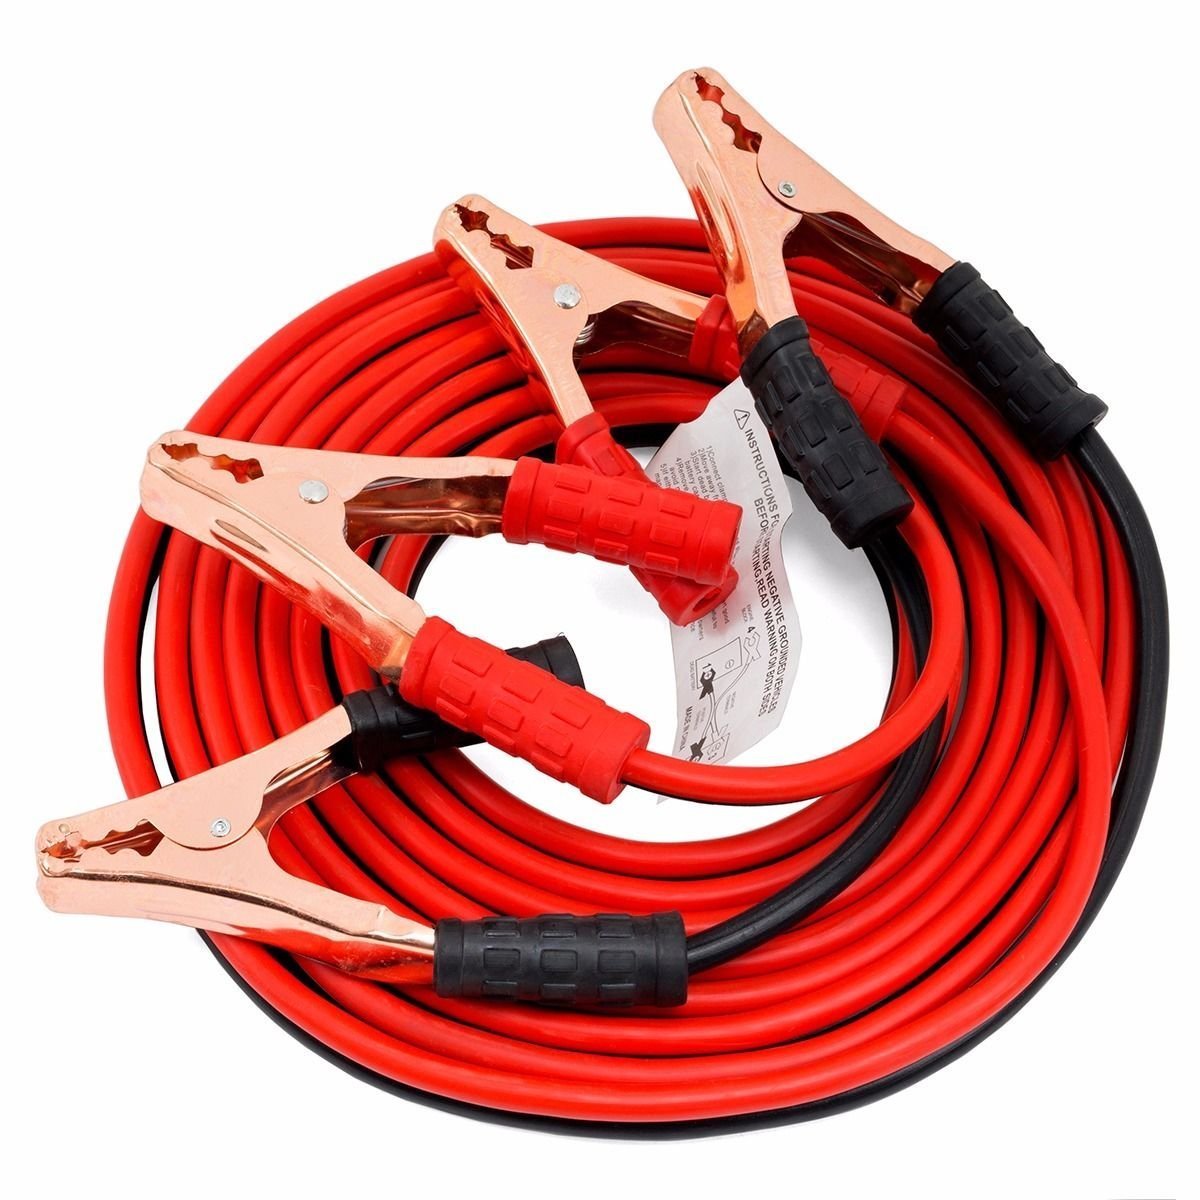 Oshotto 500 AMP Tangle Free Jumper Cable with Copper Aligator Clamps (2 Meter / 6 Feet)